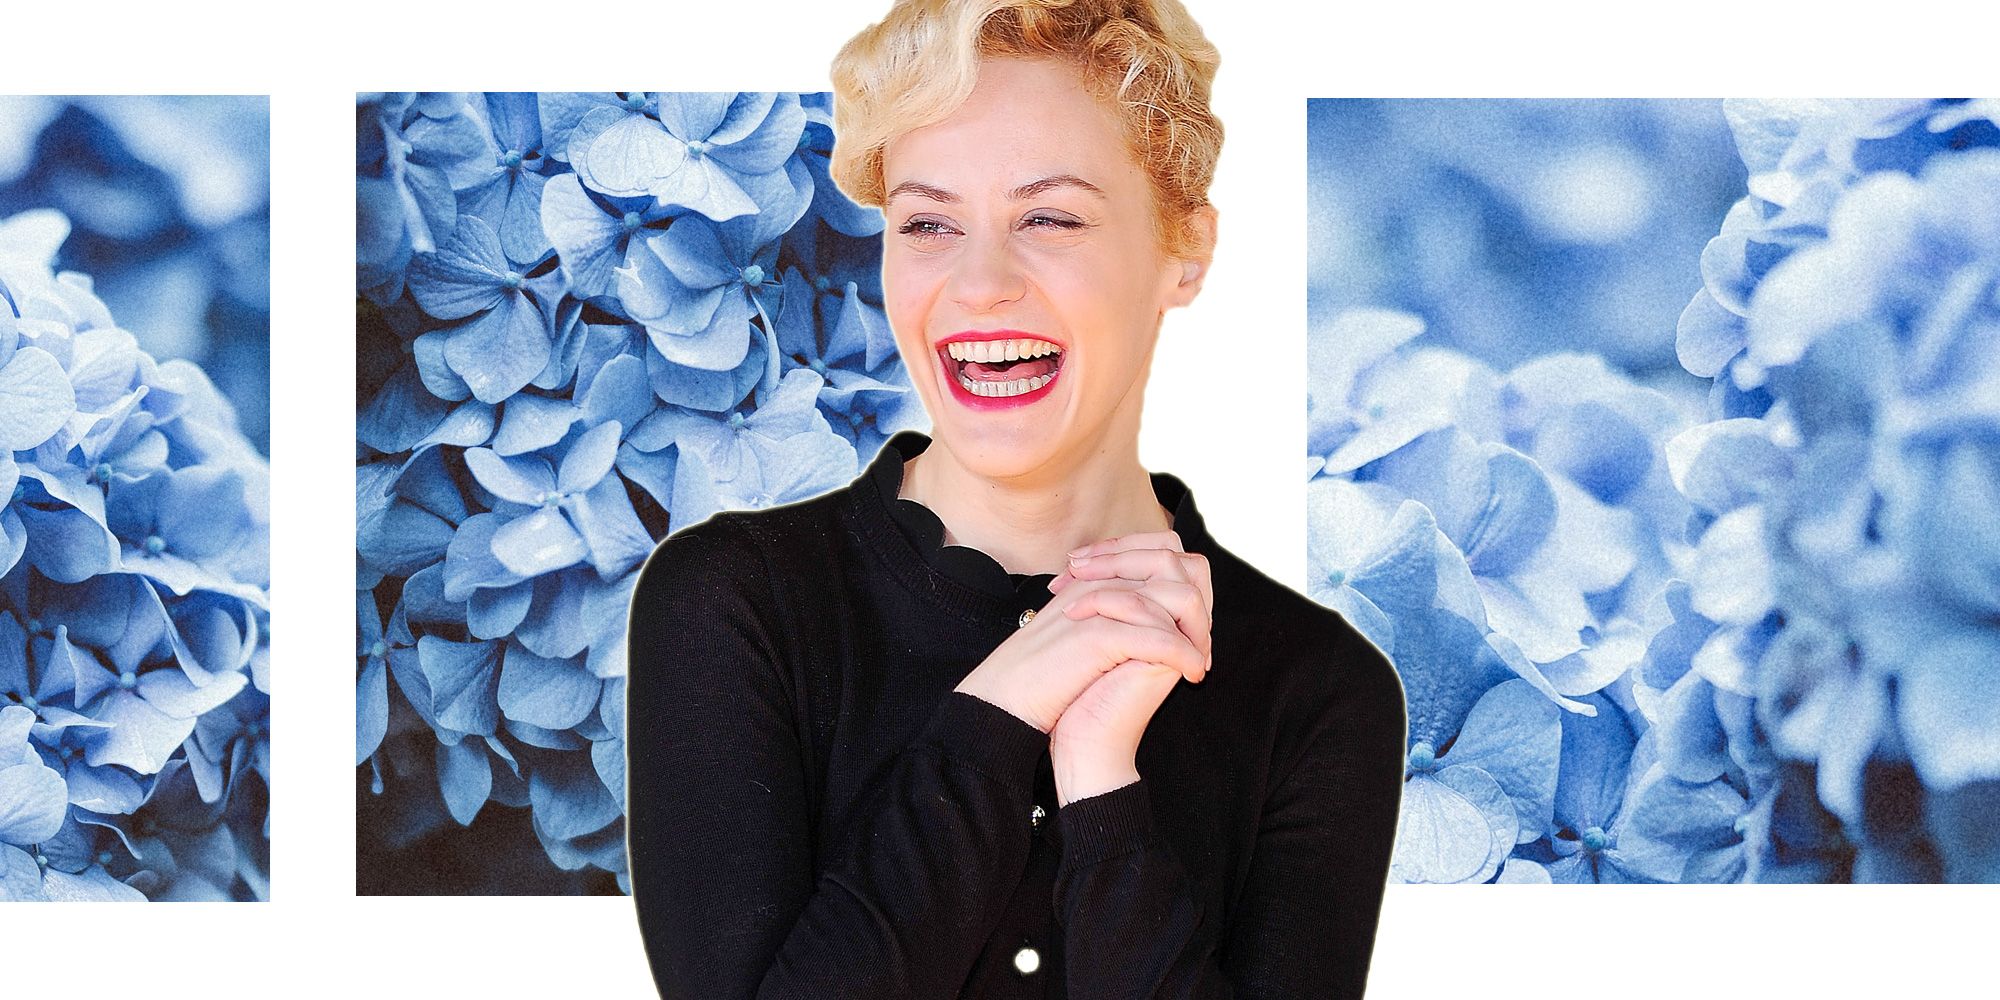 Facial expression, Beauty, Lip, Nose, Chin, Cheek, Electric blue, Blond, Smile, Neck, 